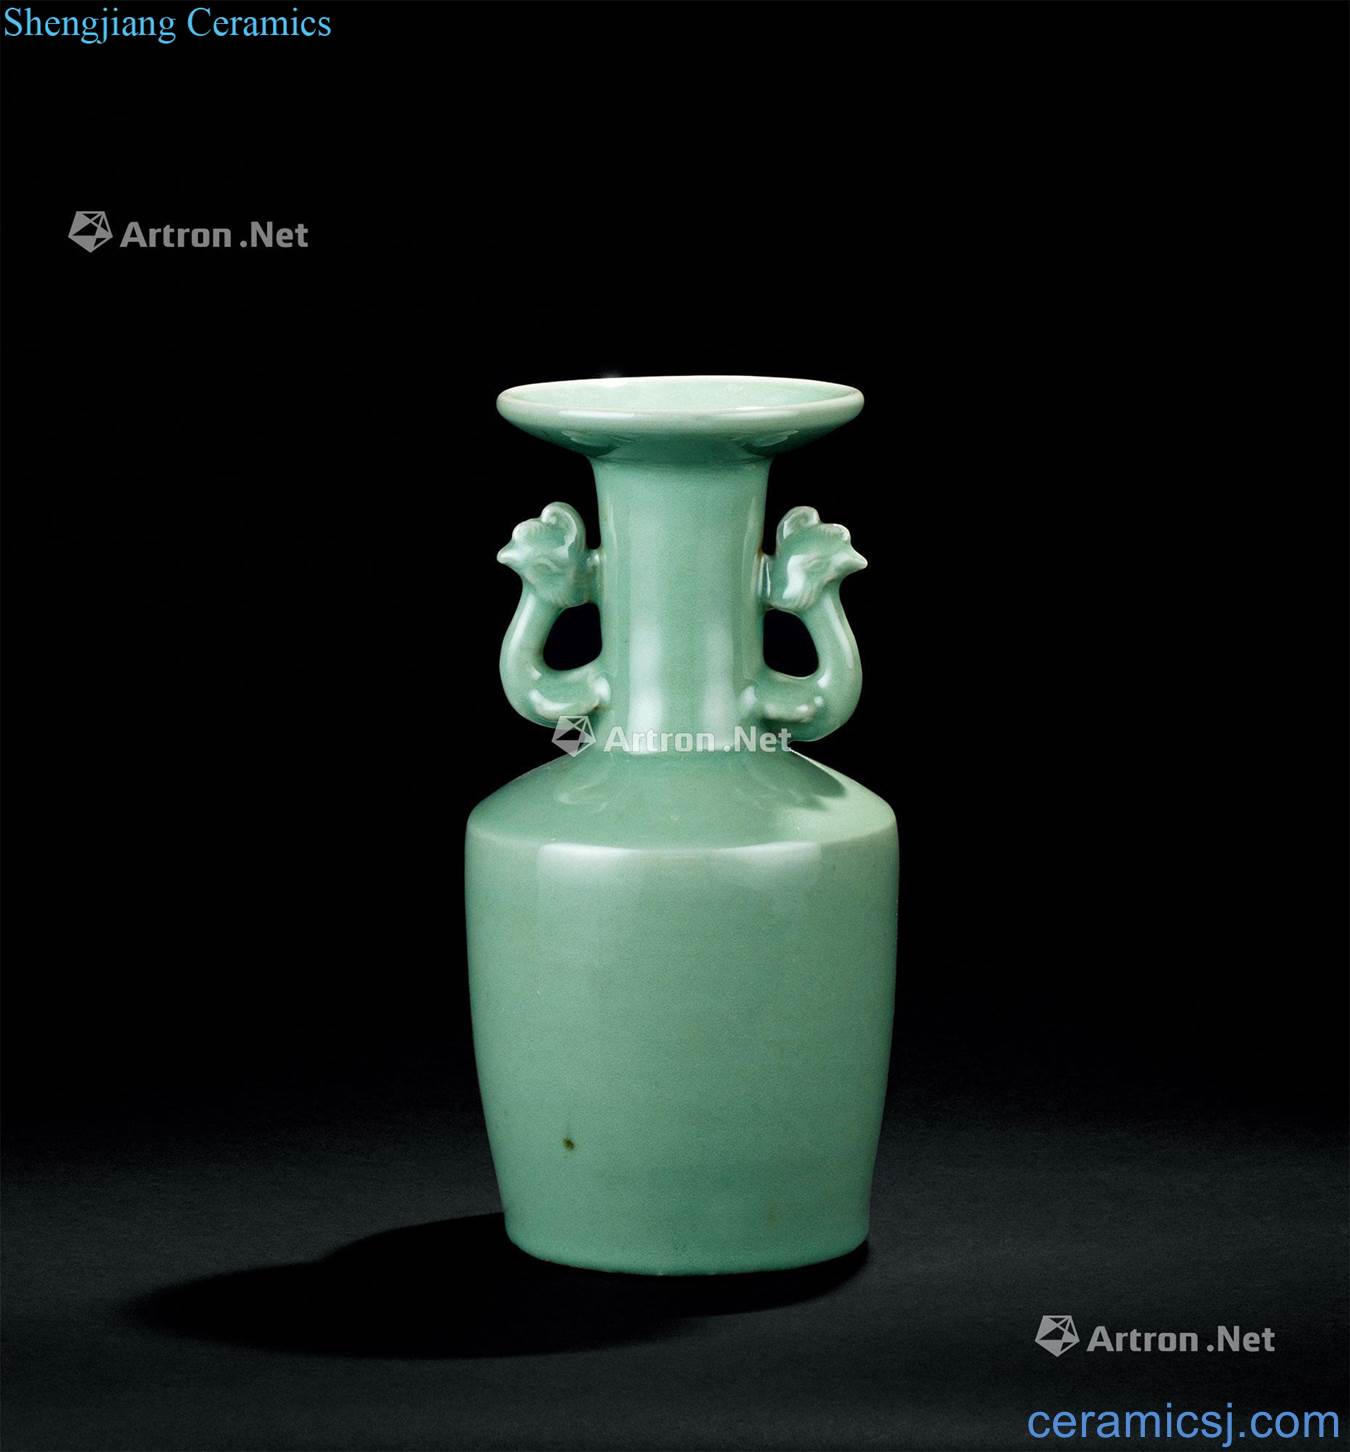 The yuan dynasty to Ming dynasty (1279 ~ 1644) celadon vase with a double phoenix